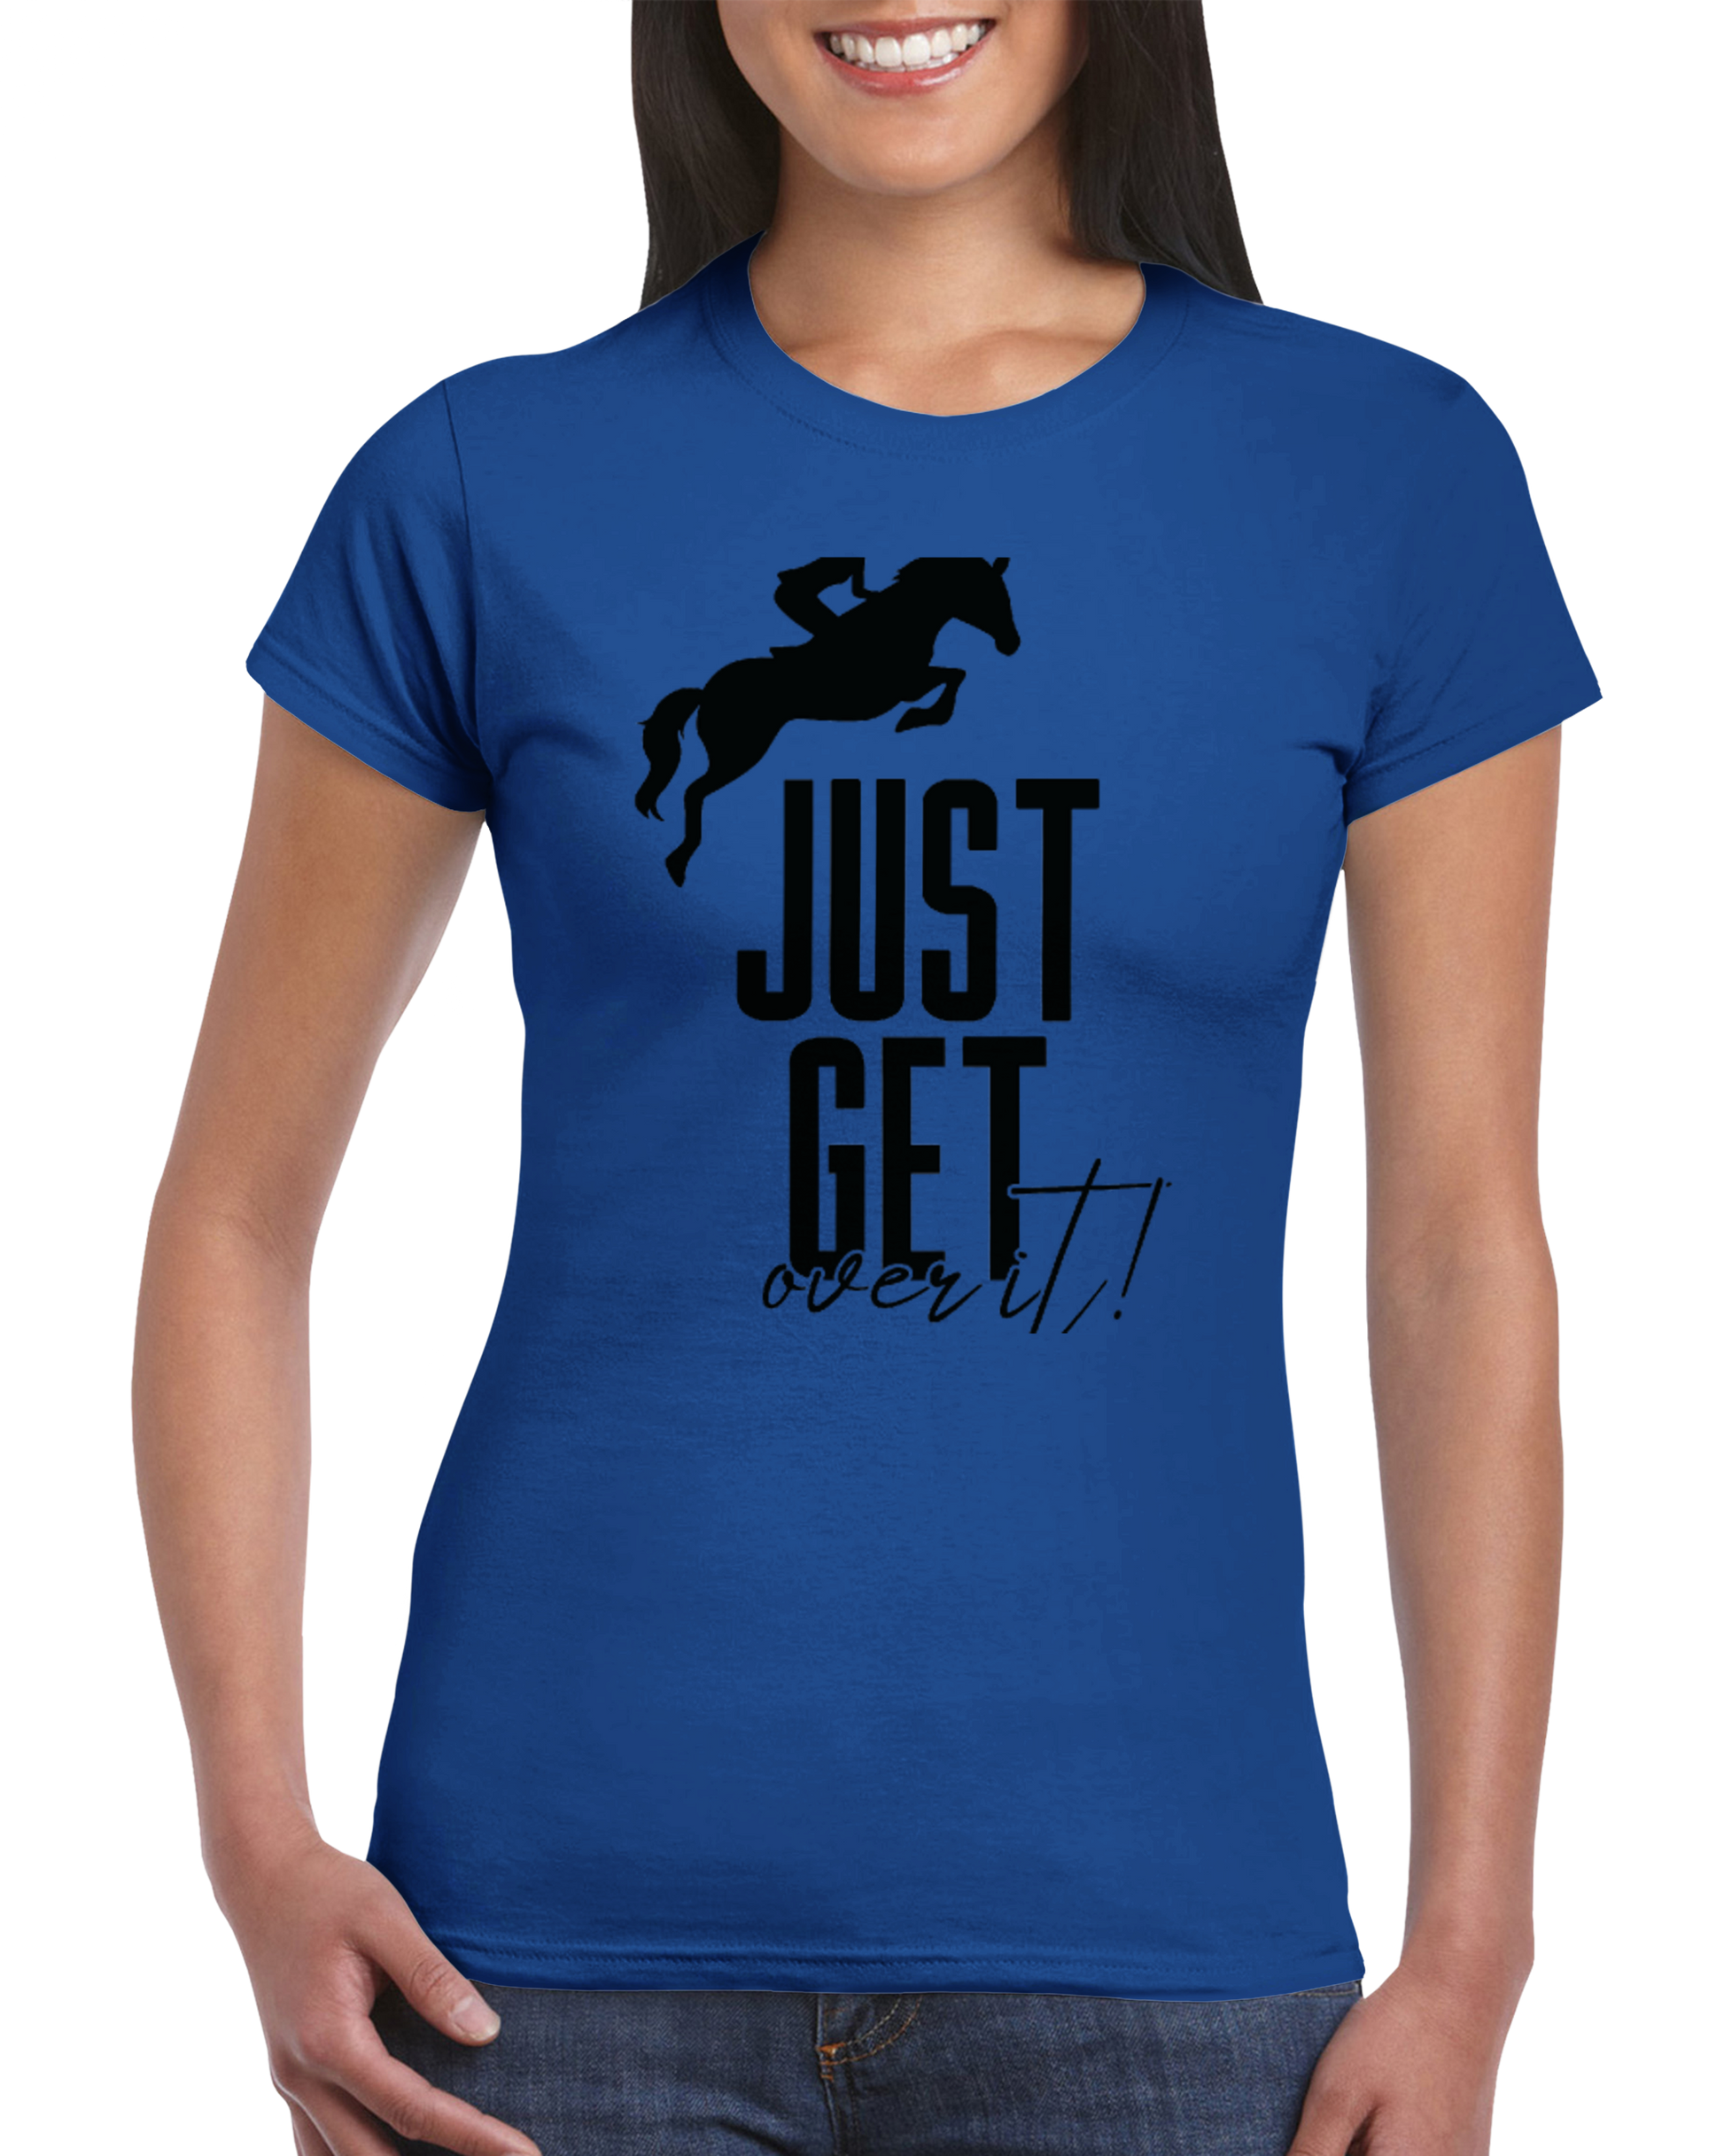 Hand Drawn Horse || Women's T-shirt - Design: "Get Over It"; Static Design; Personalizable Back Text